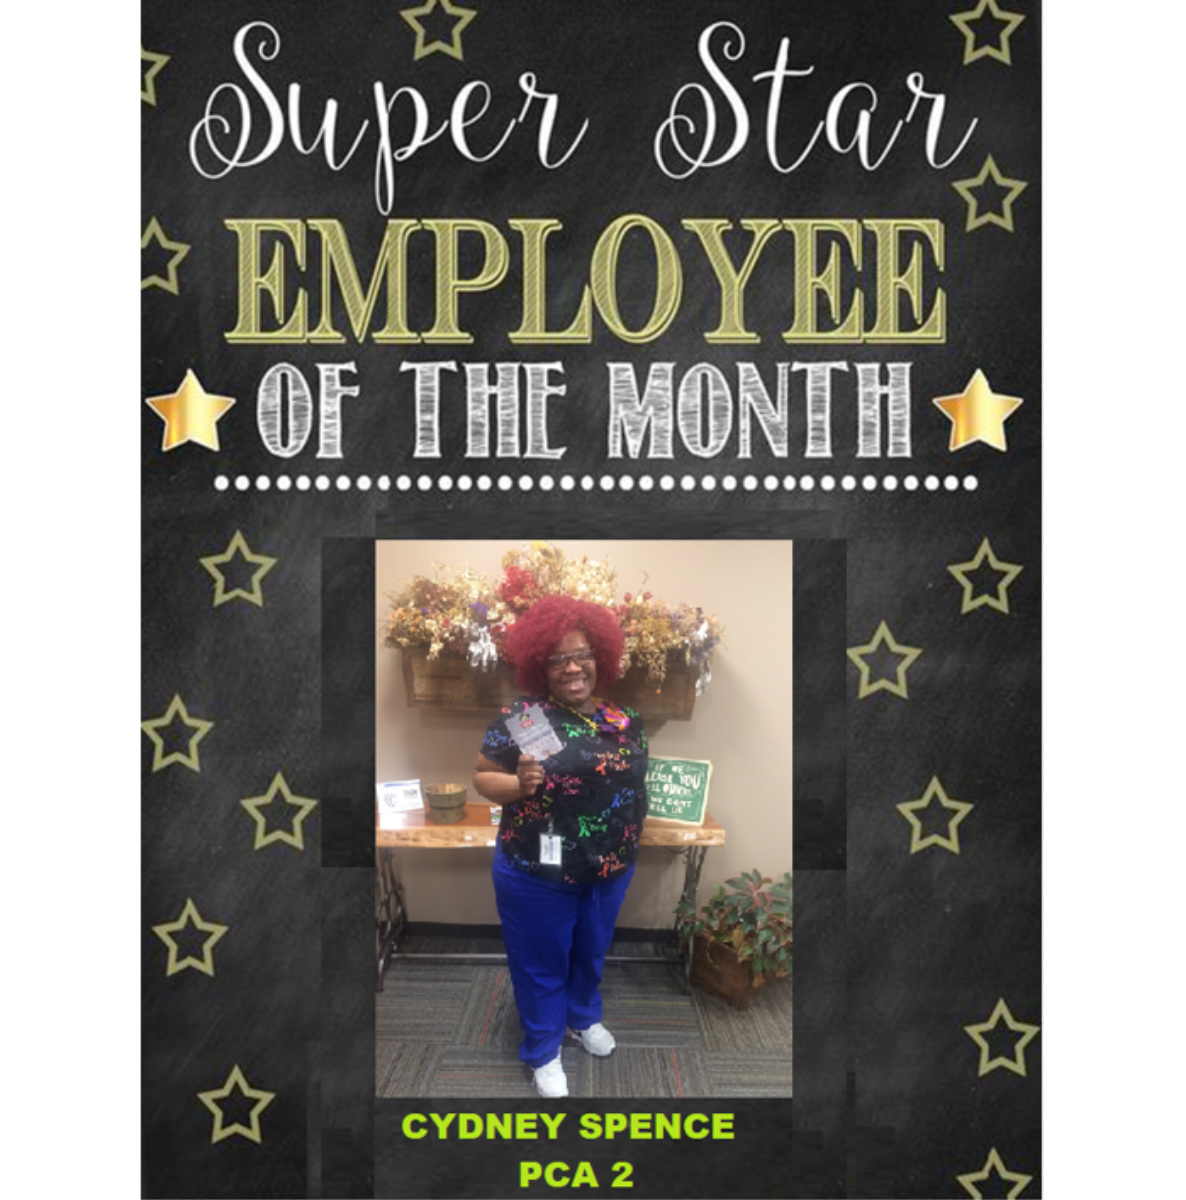 Home Care in Pittsburgh PA: Employee of the Month